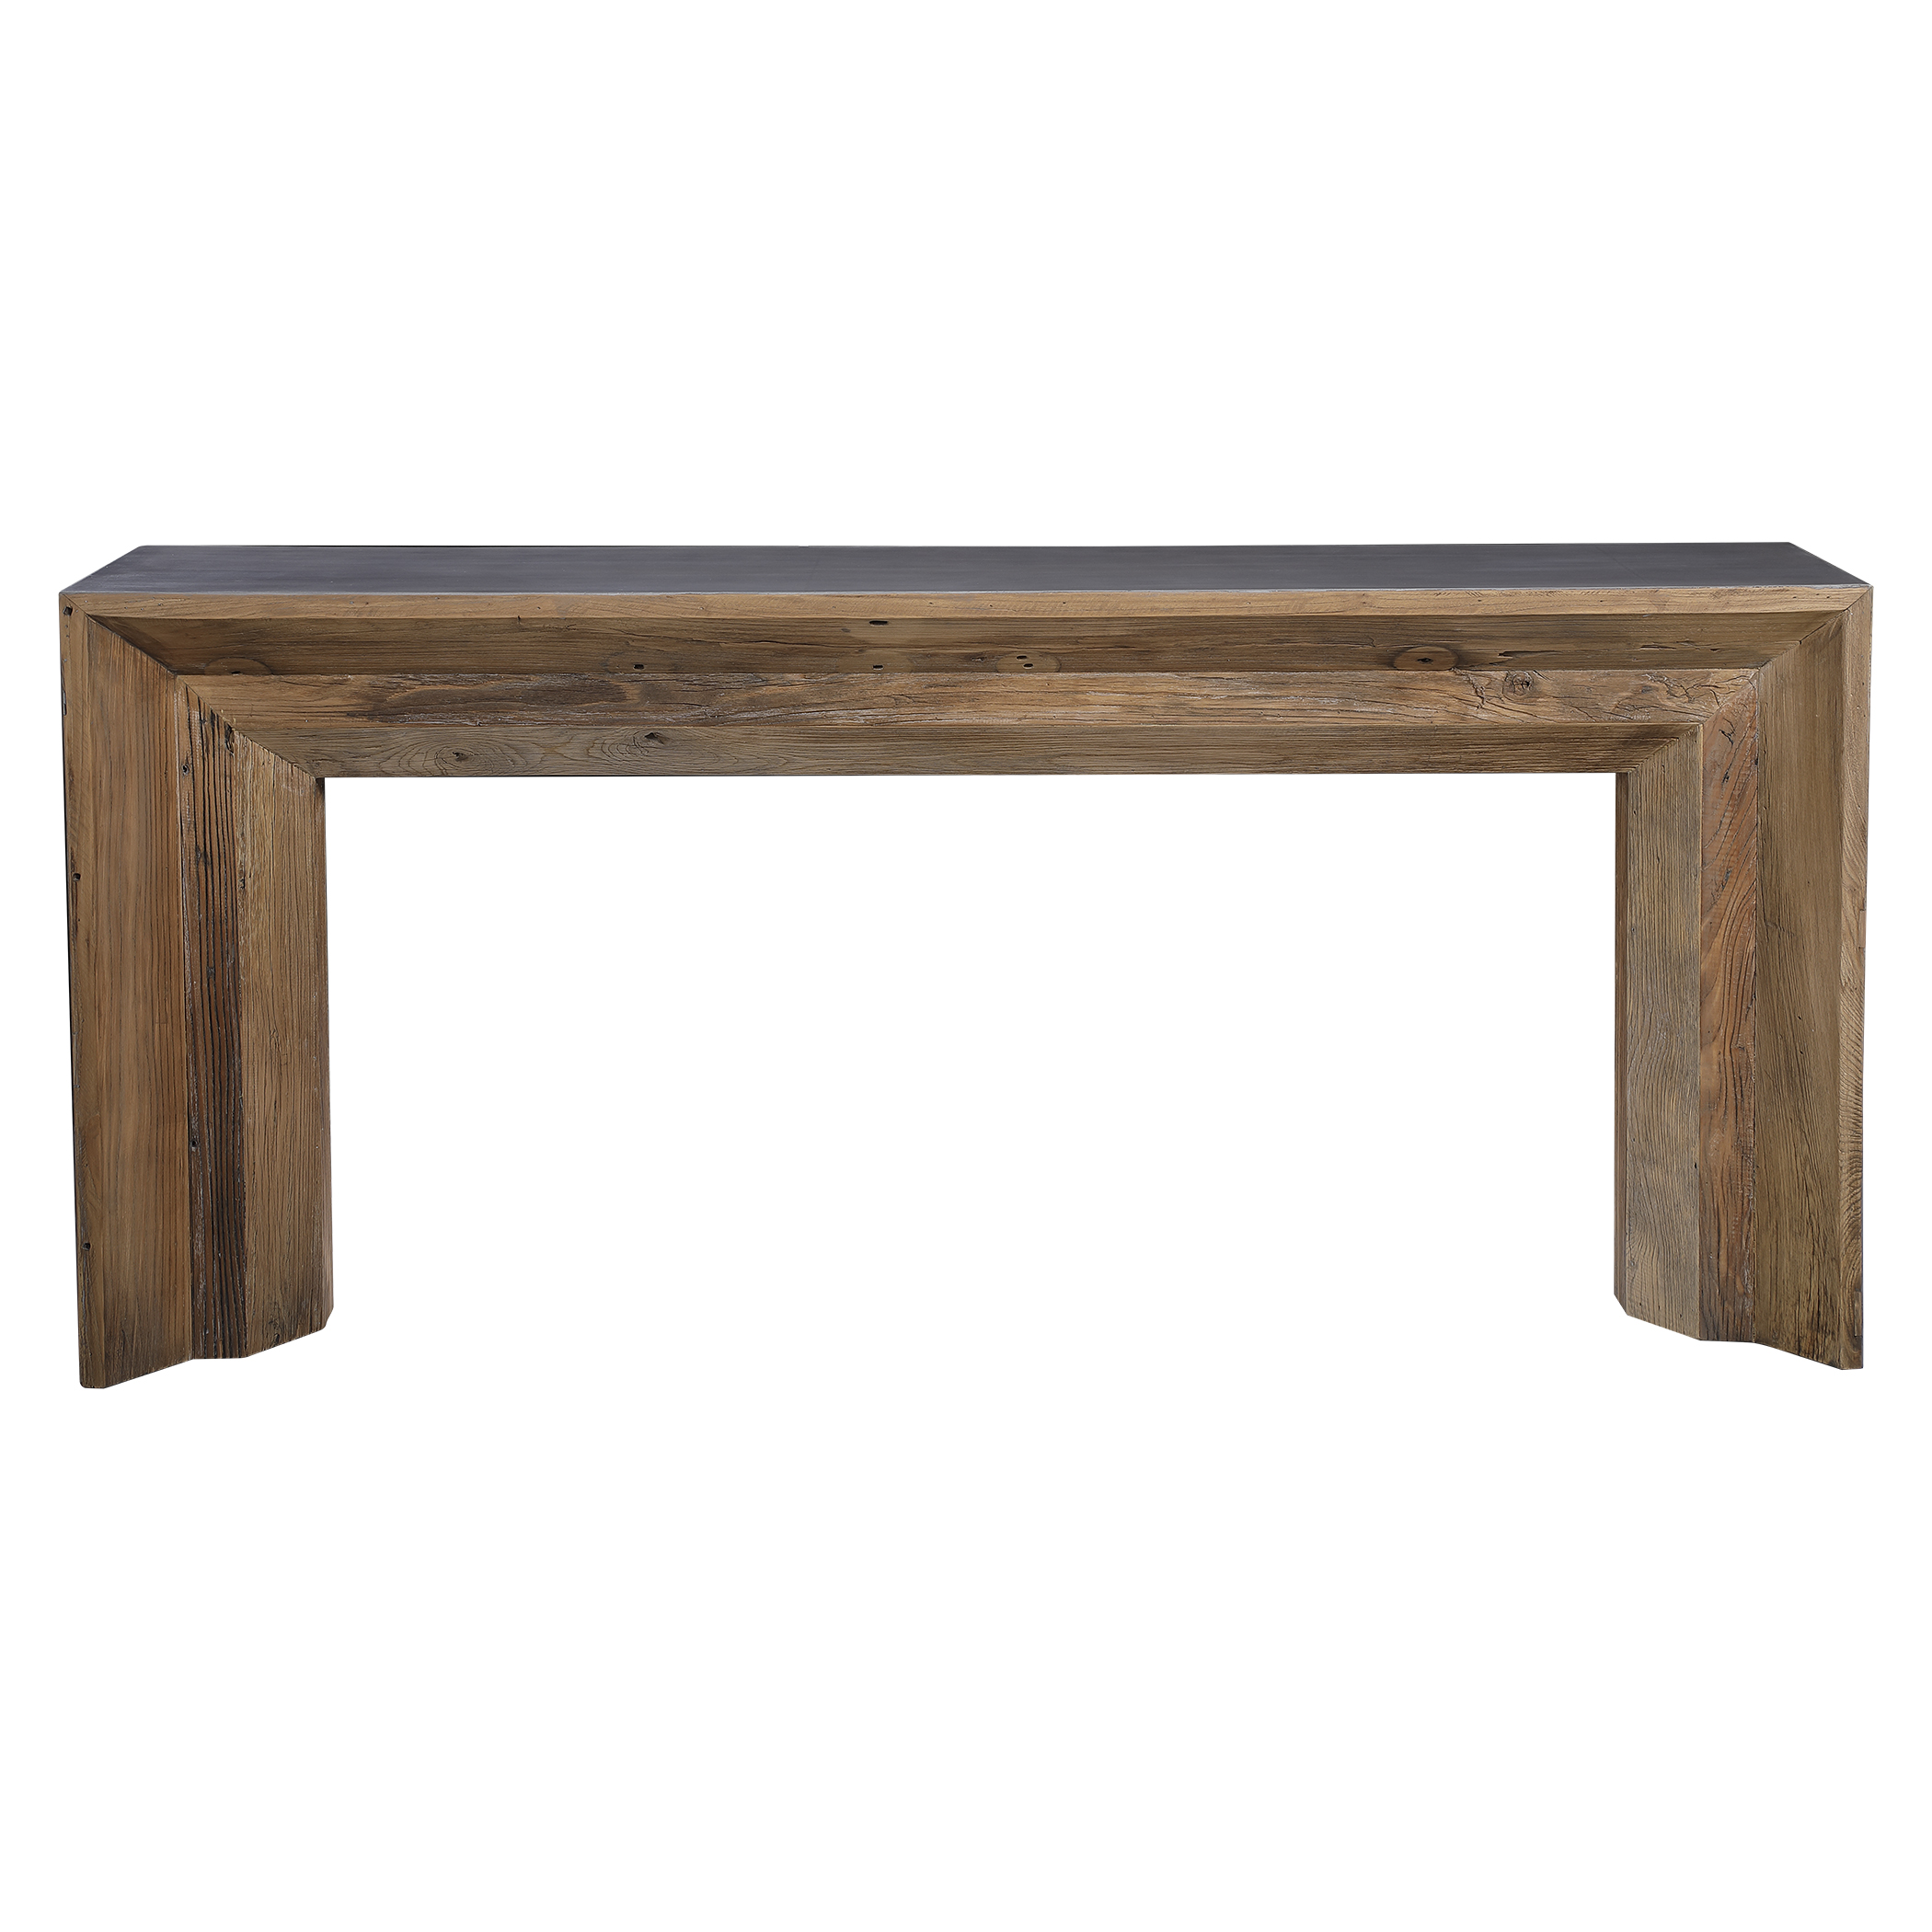 Online Designer Living Room Vail Reclaimed Wood Console Table